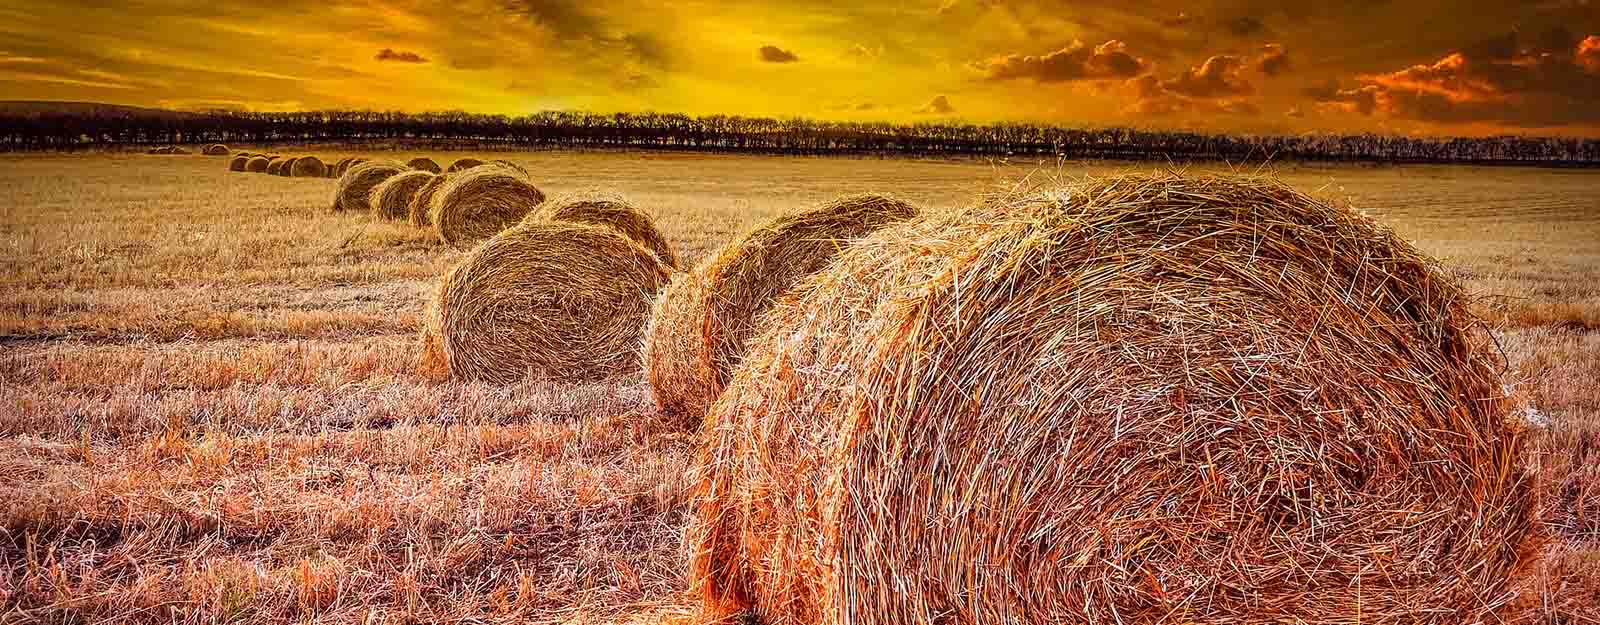 Photo of a hay field at sunset with round bales in a row.